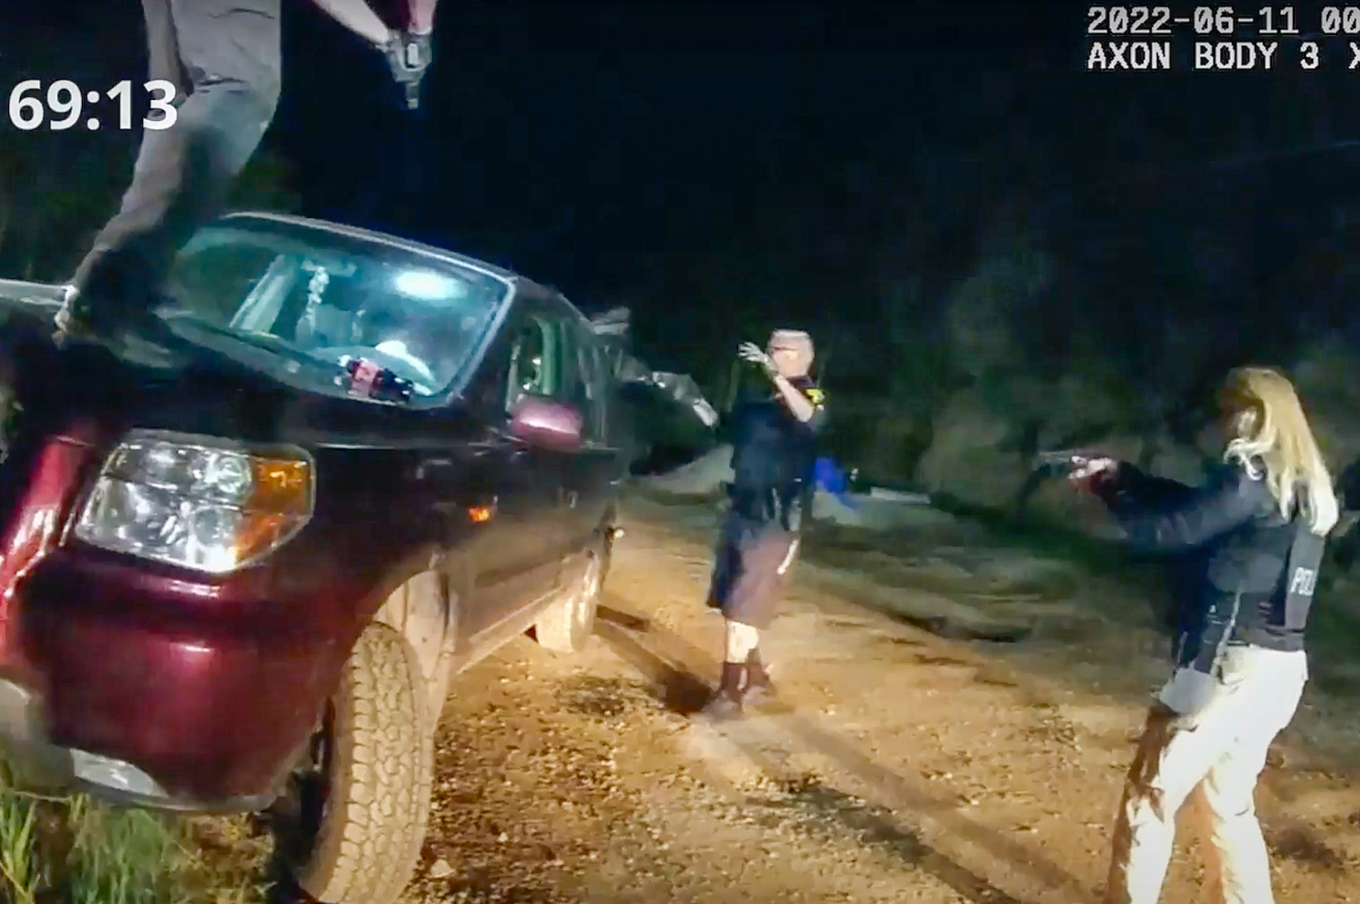 Body camera footage worn by Colorado officers show law enforcement’s interaction with Christian Glass, 22, in June, during which his family believes he was suffering a mental health episode